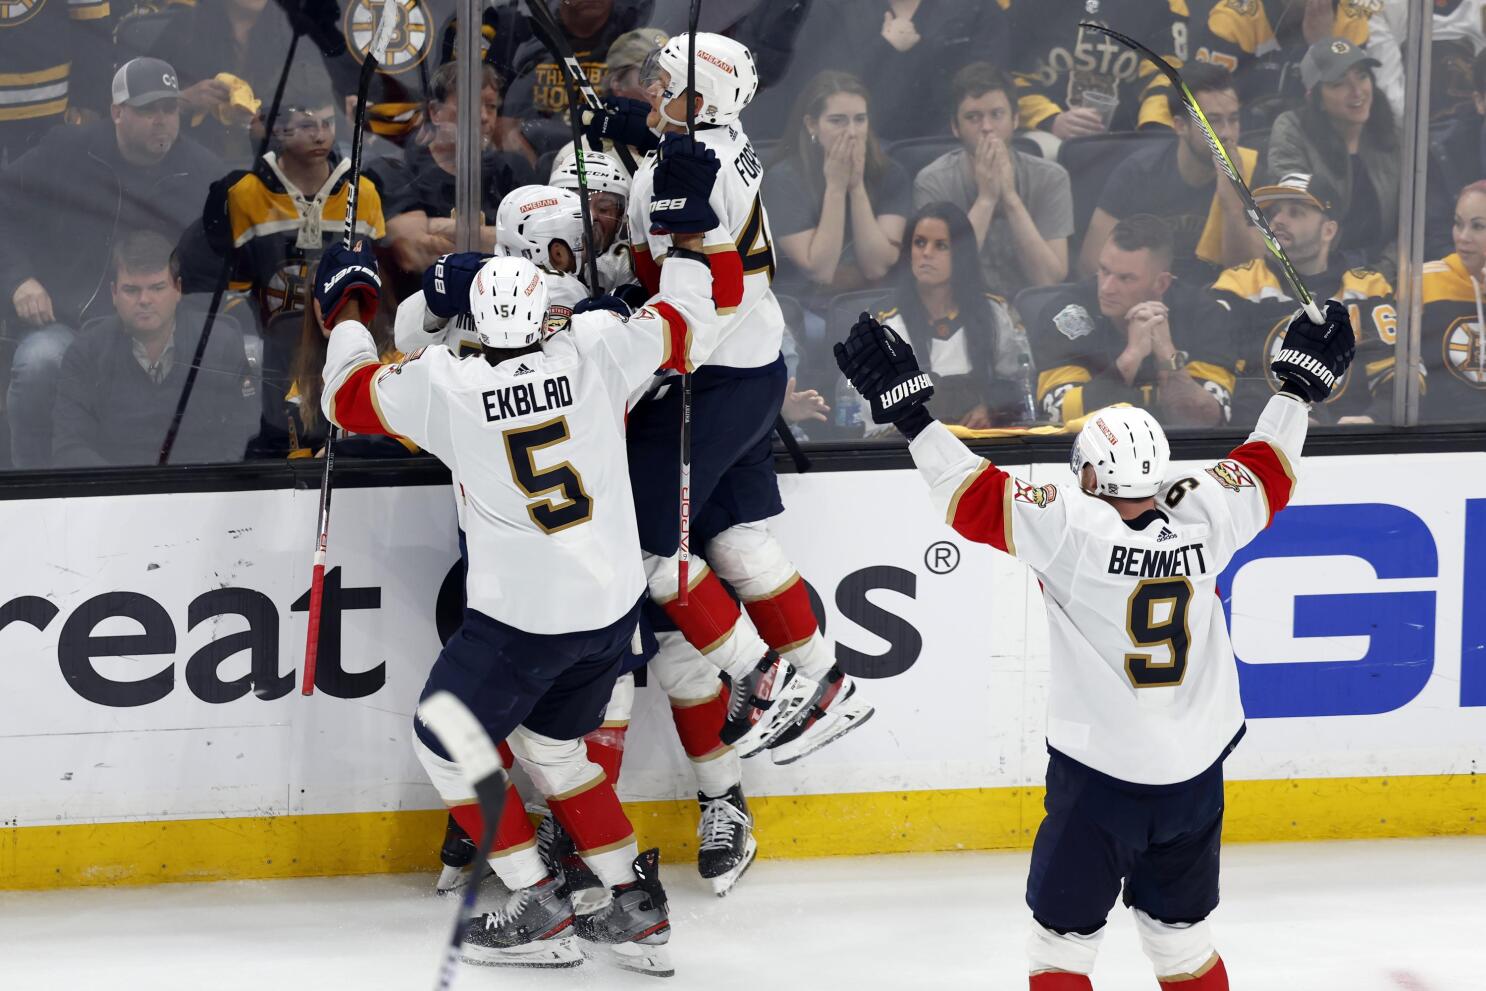 The Capitals' Stanley Cup Final ticket presale sold out within